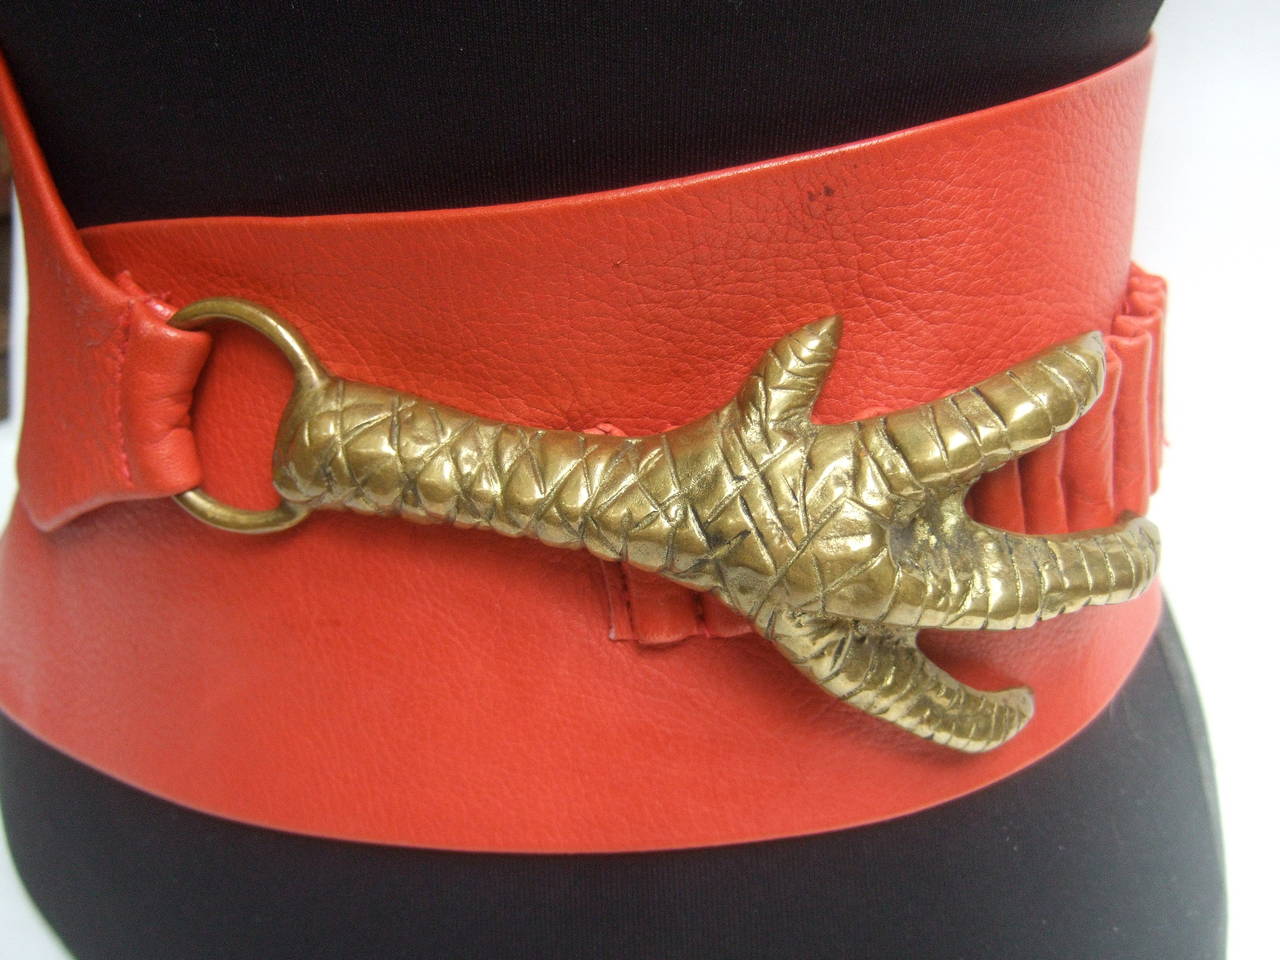 Surrealistic Scarlet Red Leather Brass Claw Belt by Georges Mailian Paris In Excellent Condition For Sale In University City, MO